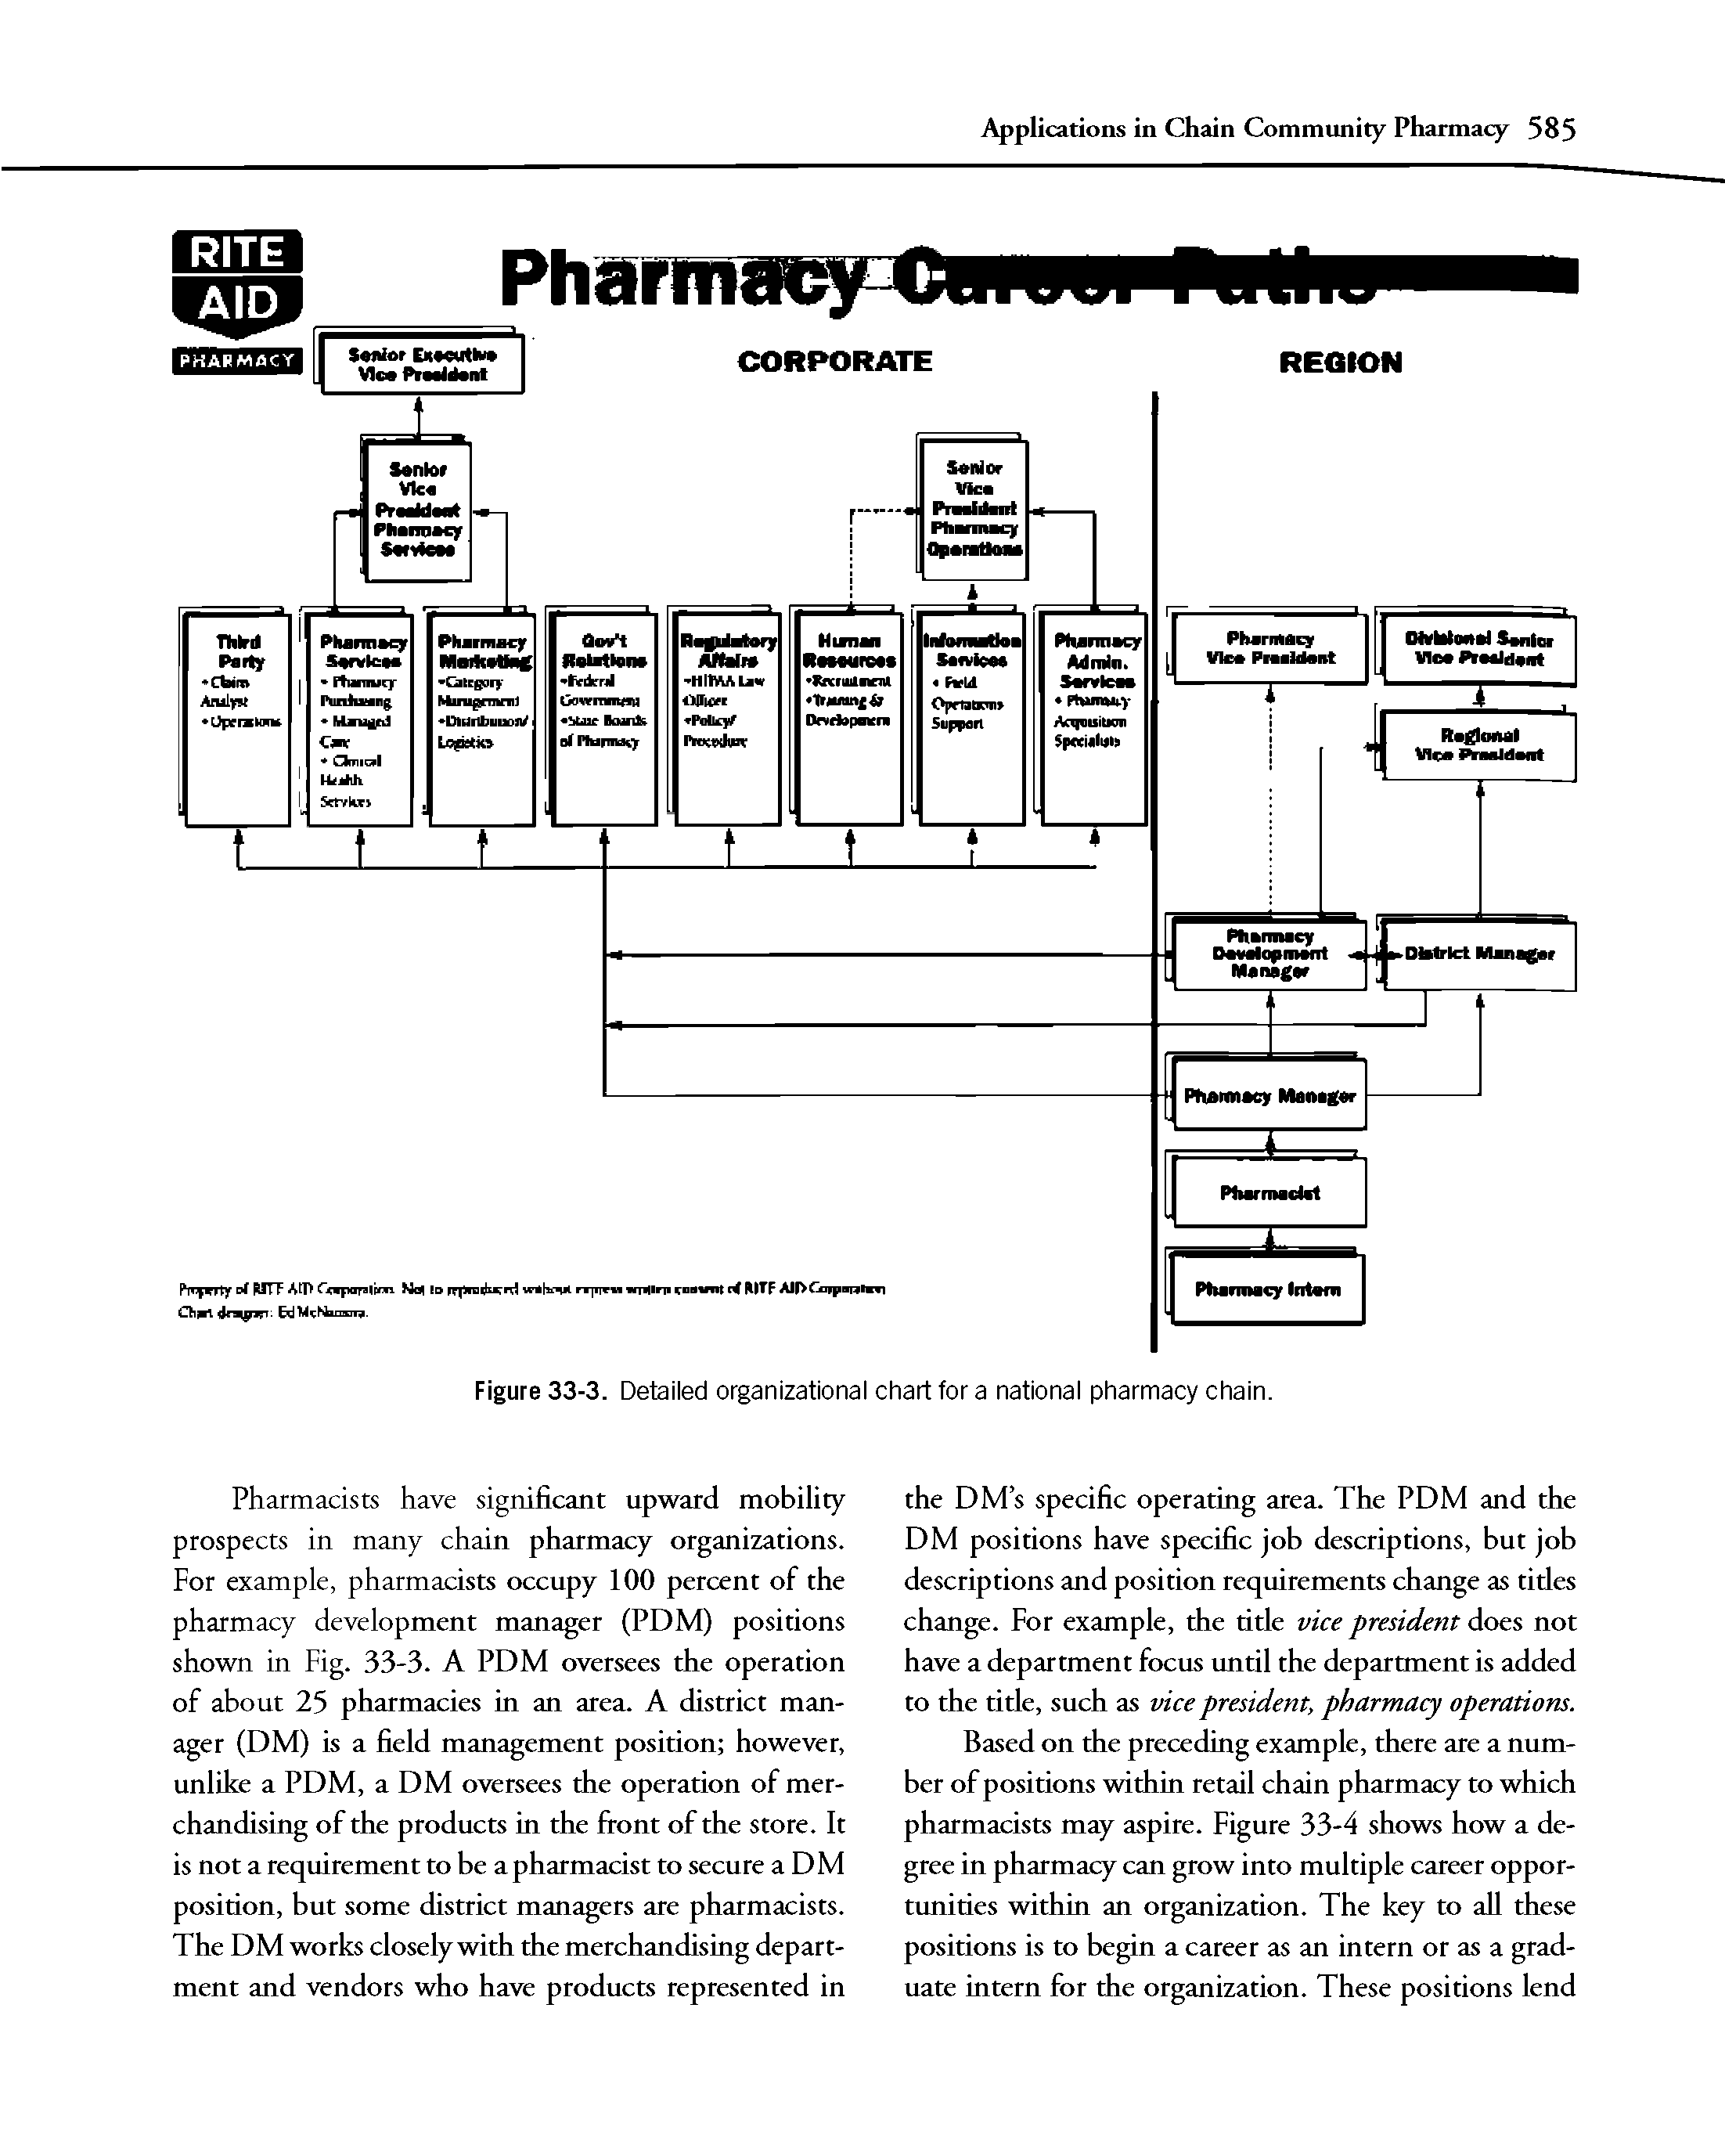 Figure 33-3. Detailed organizational chart for a national pharmacy chain.